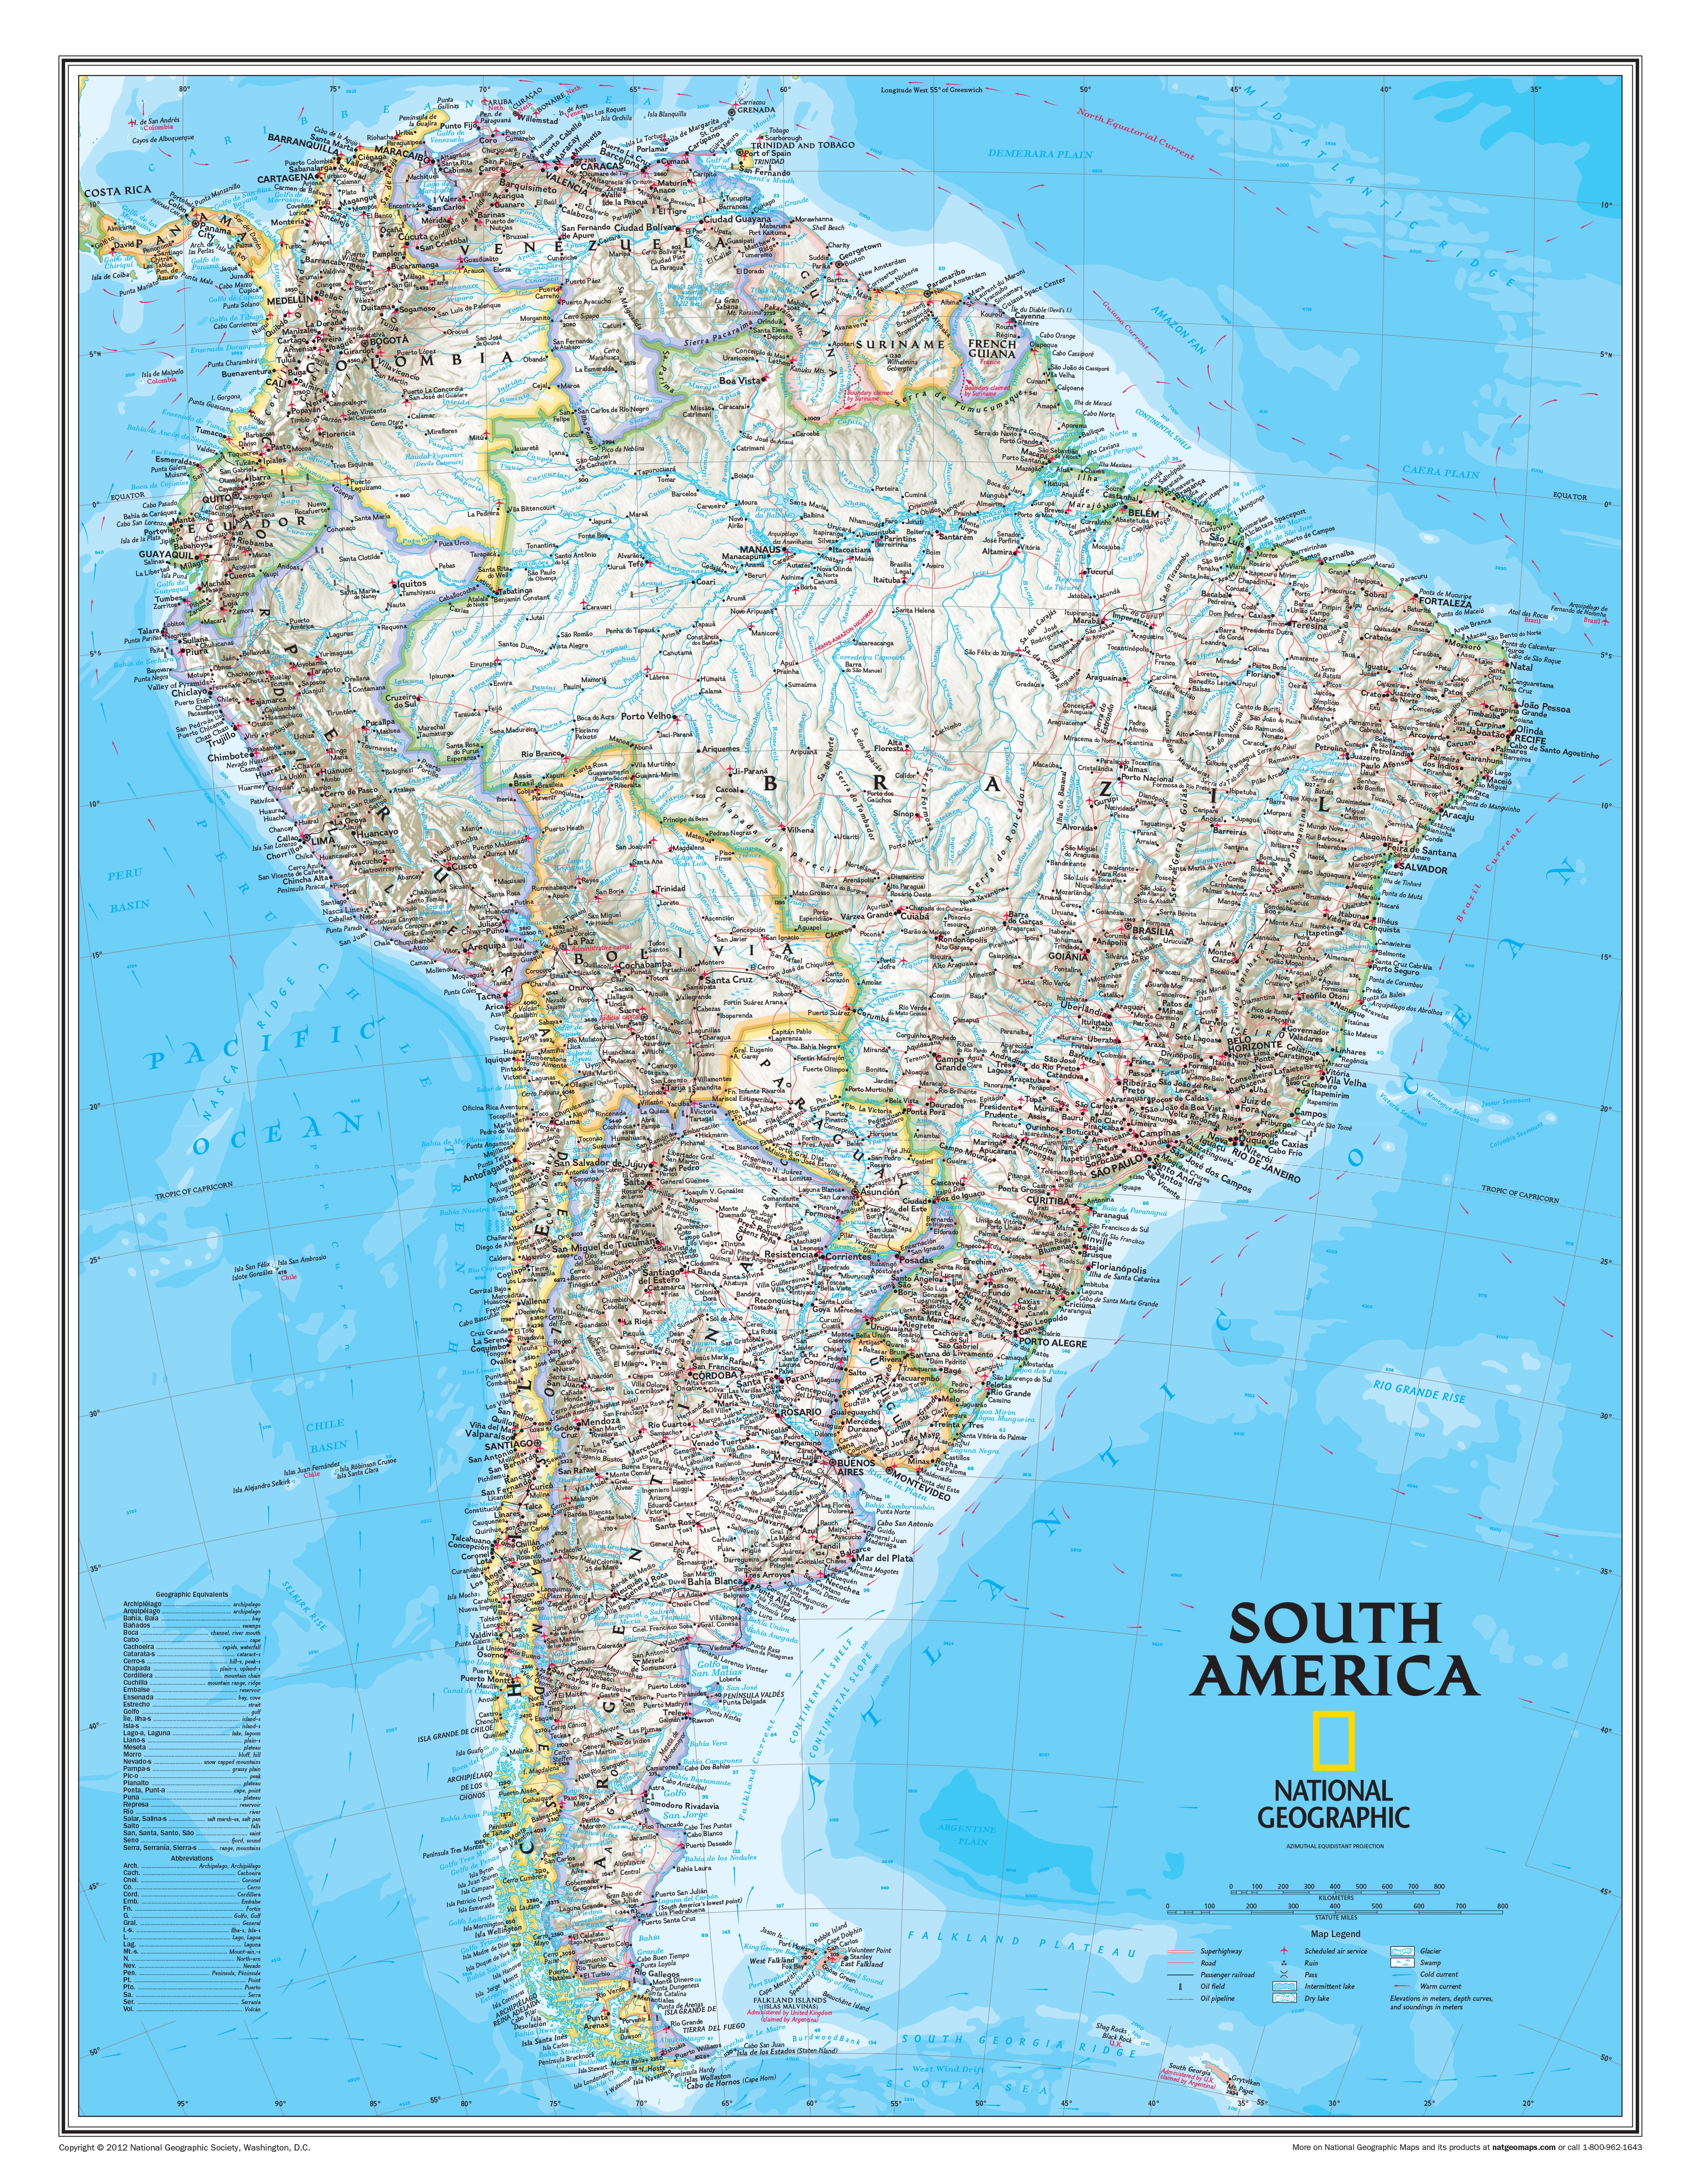 South America a part of National Geographic World and 6 Continent Maps Classroom Pull Down 7 Map Educational Bundle